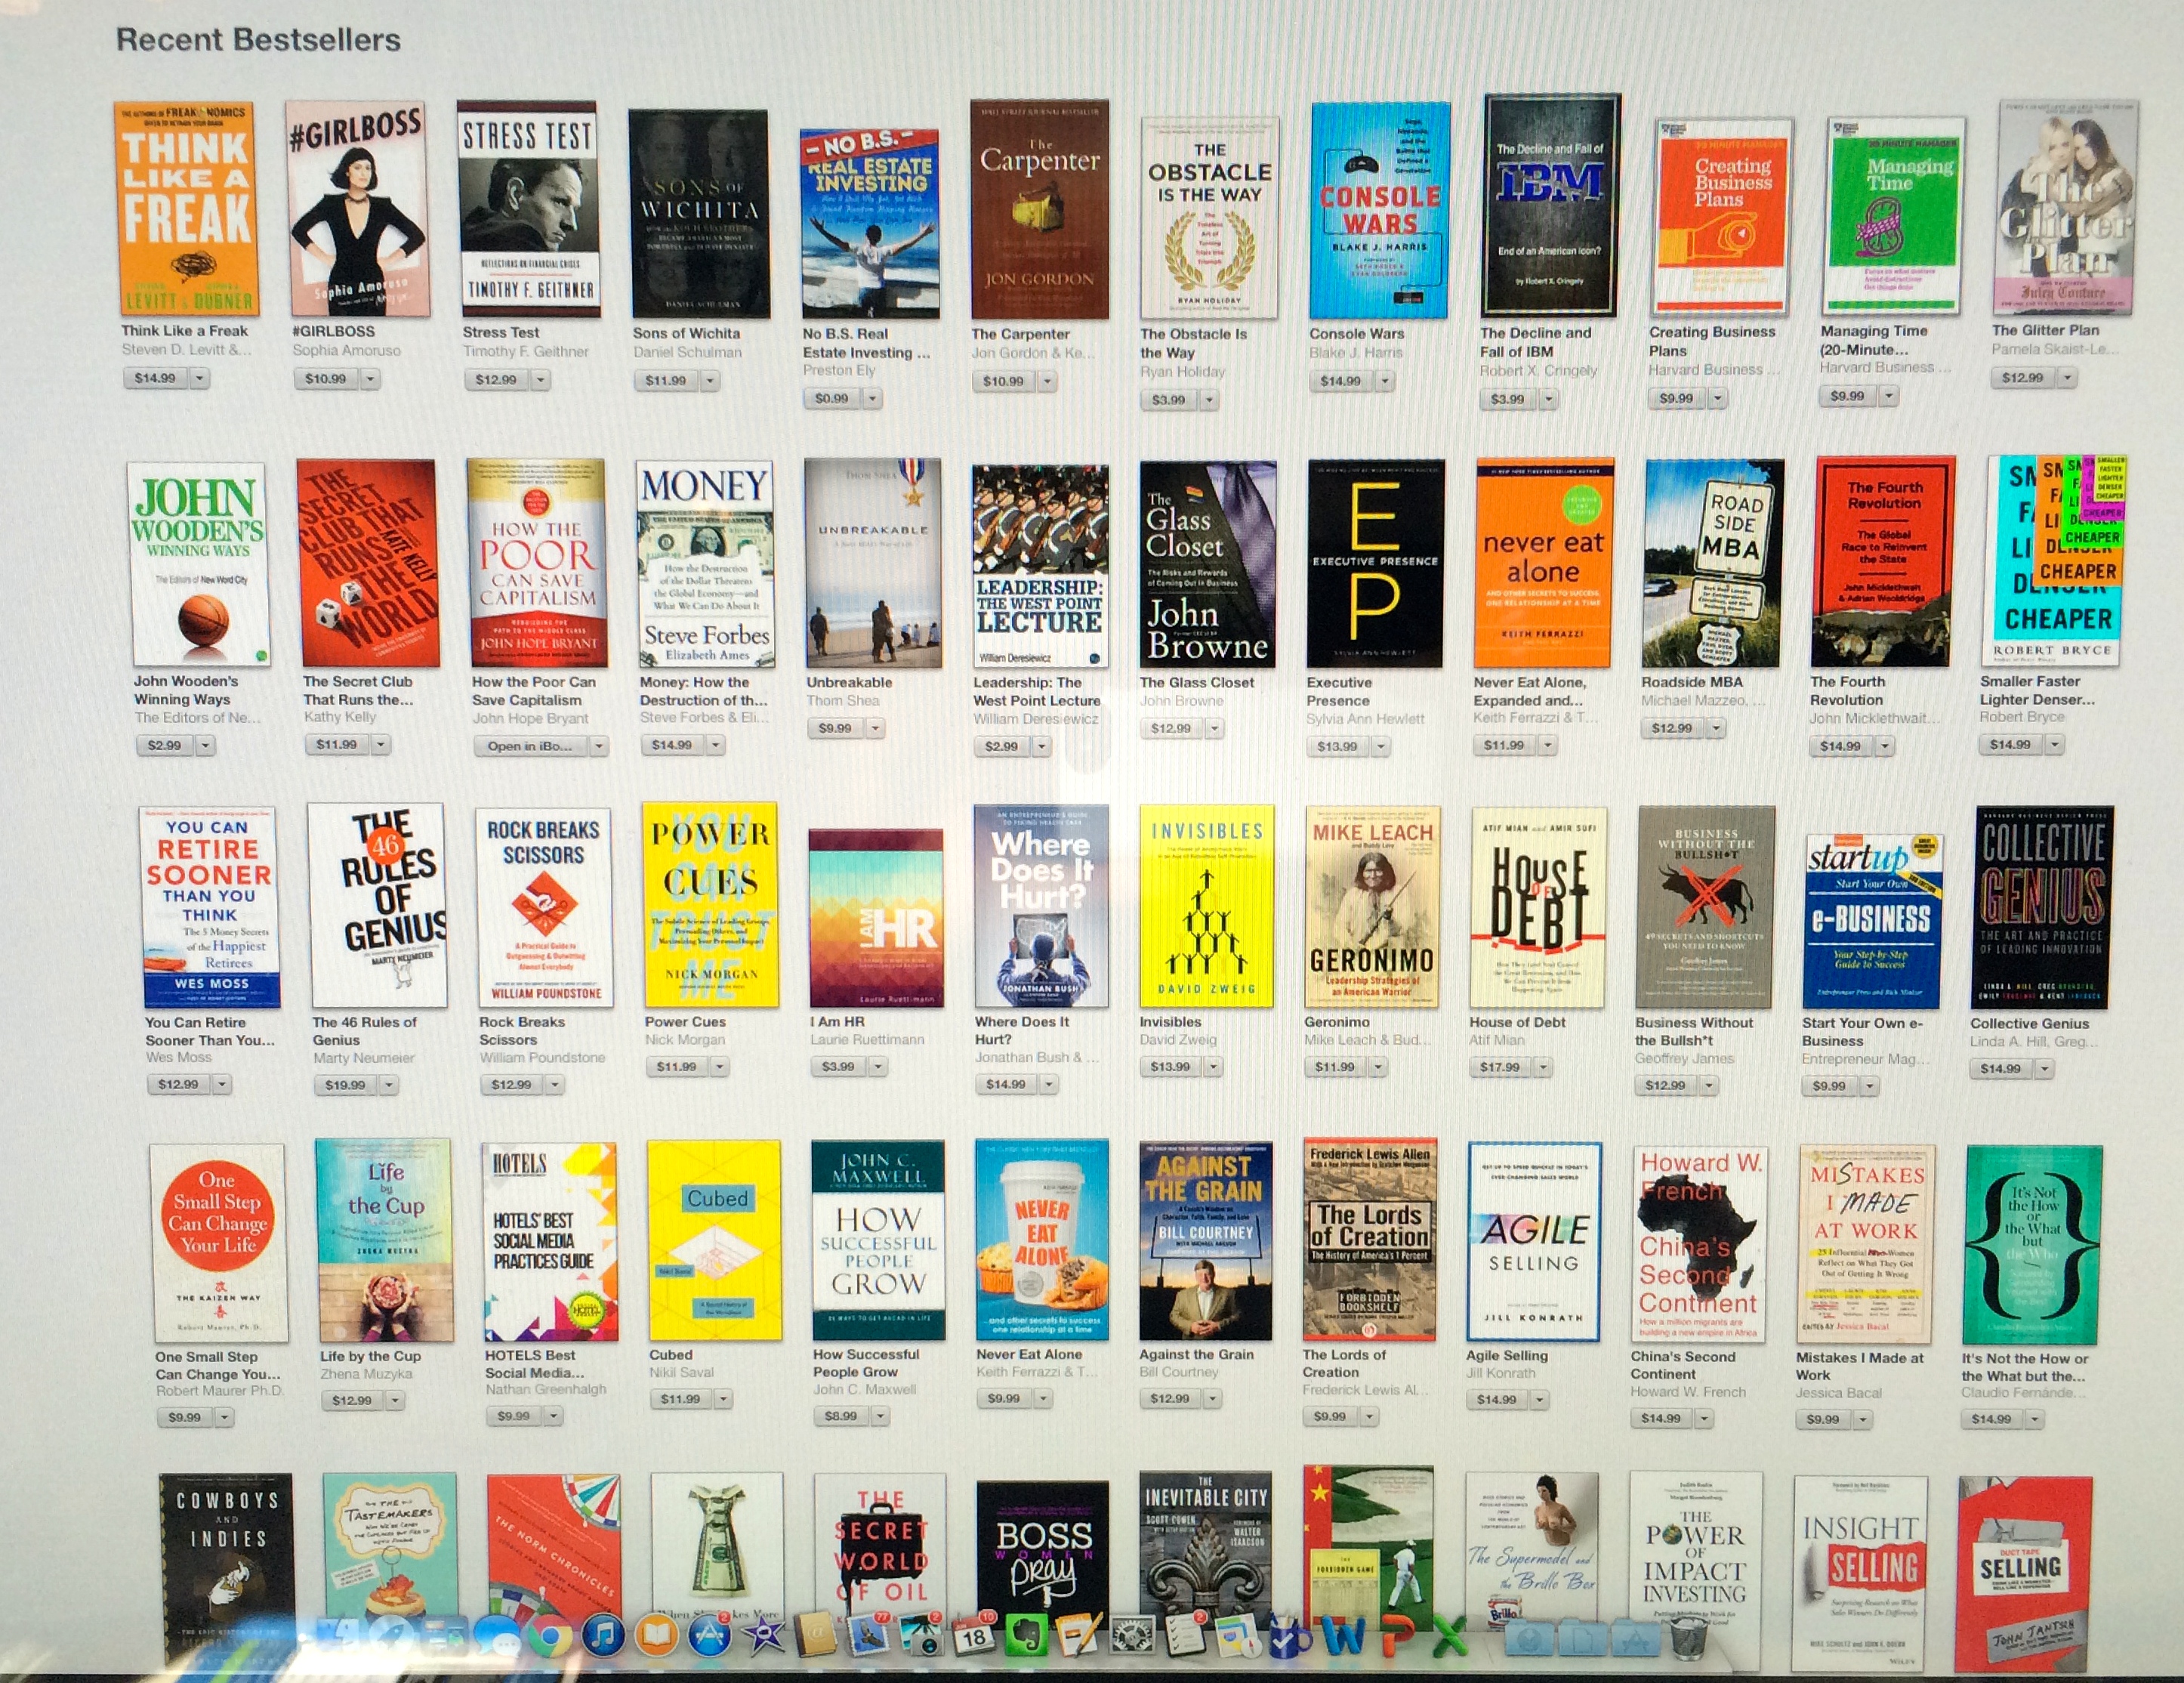 Book Continues as Bestseller on Apple's iBooks Top 100 - John